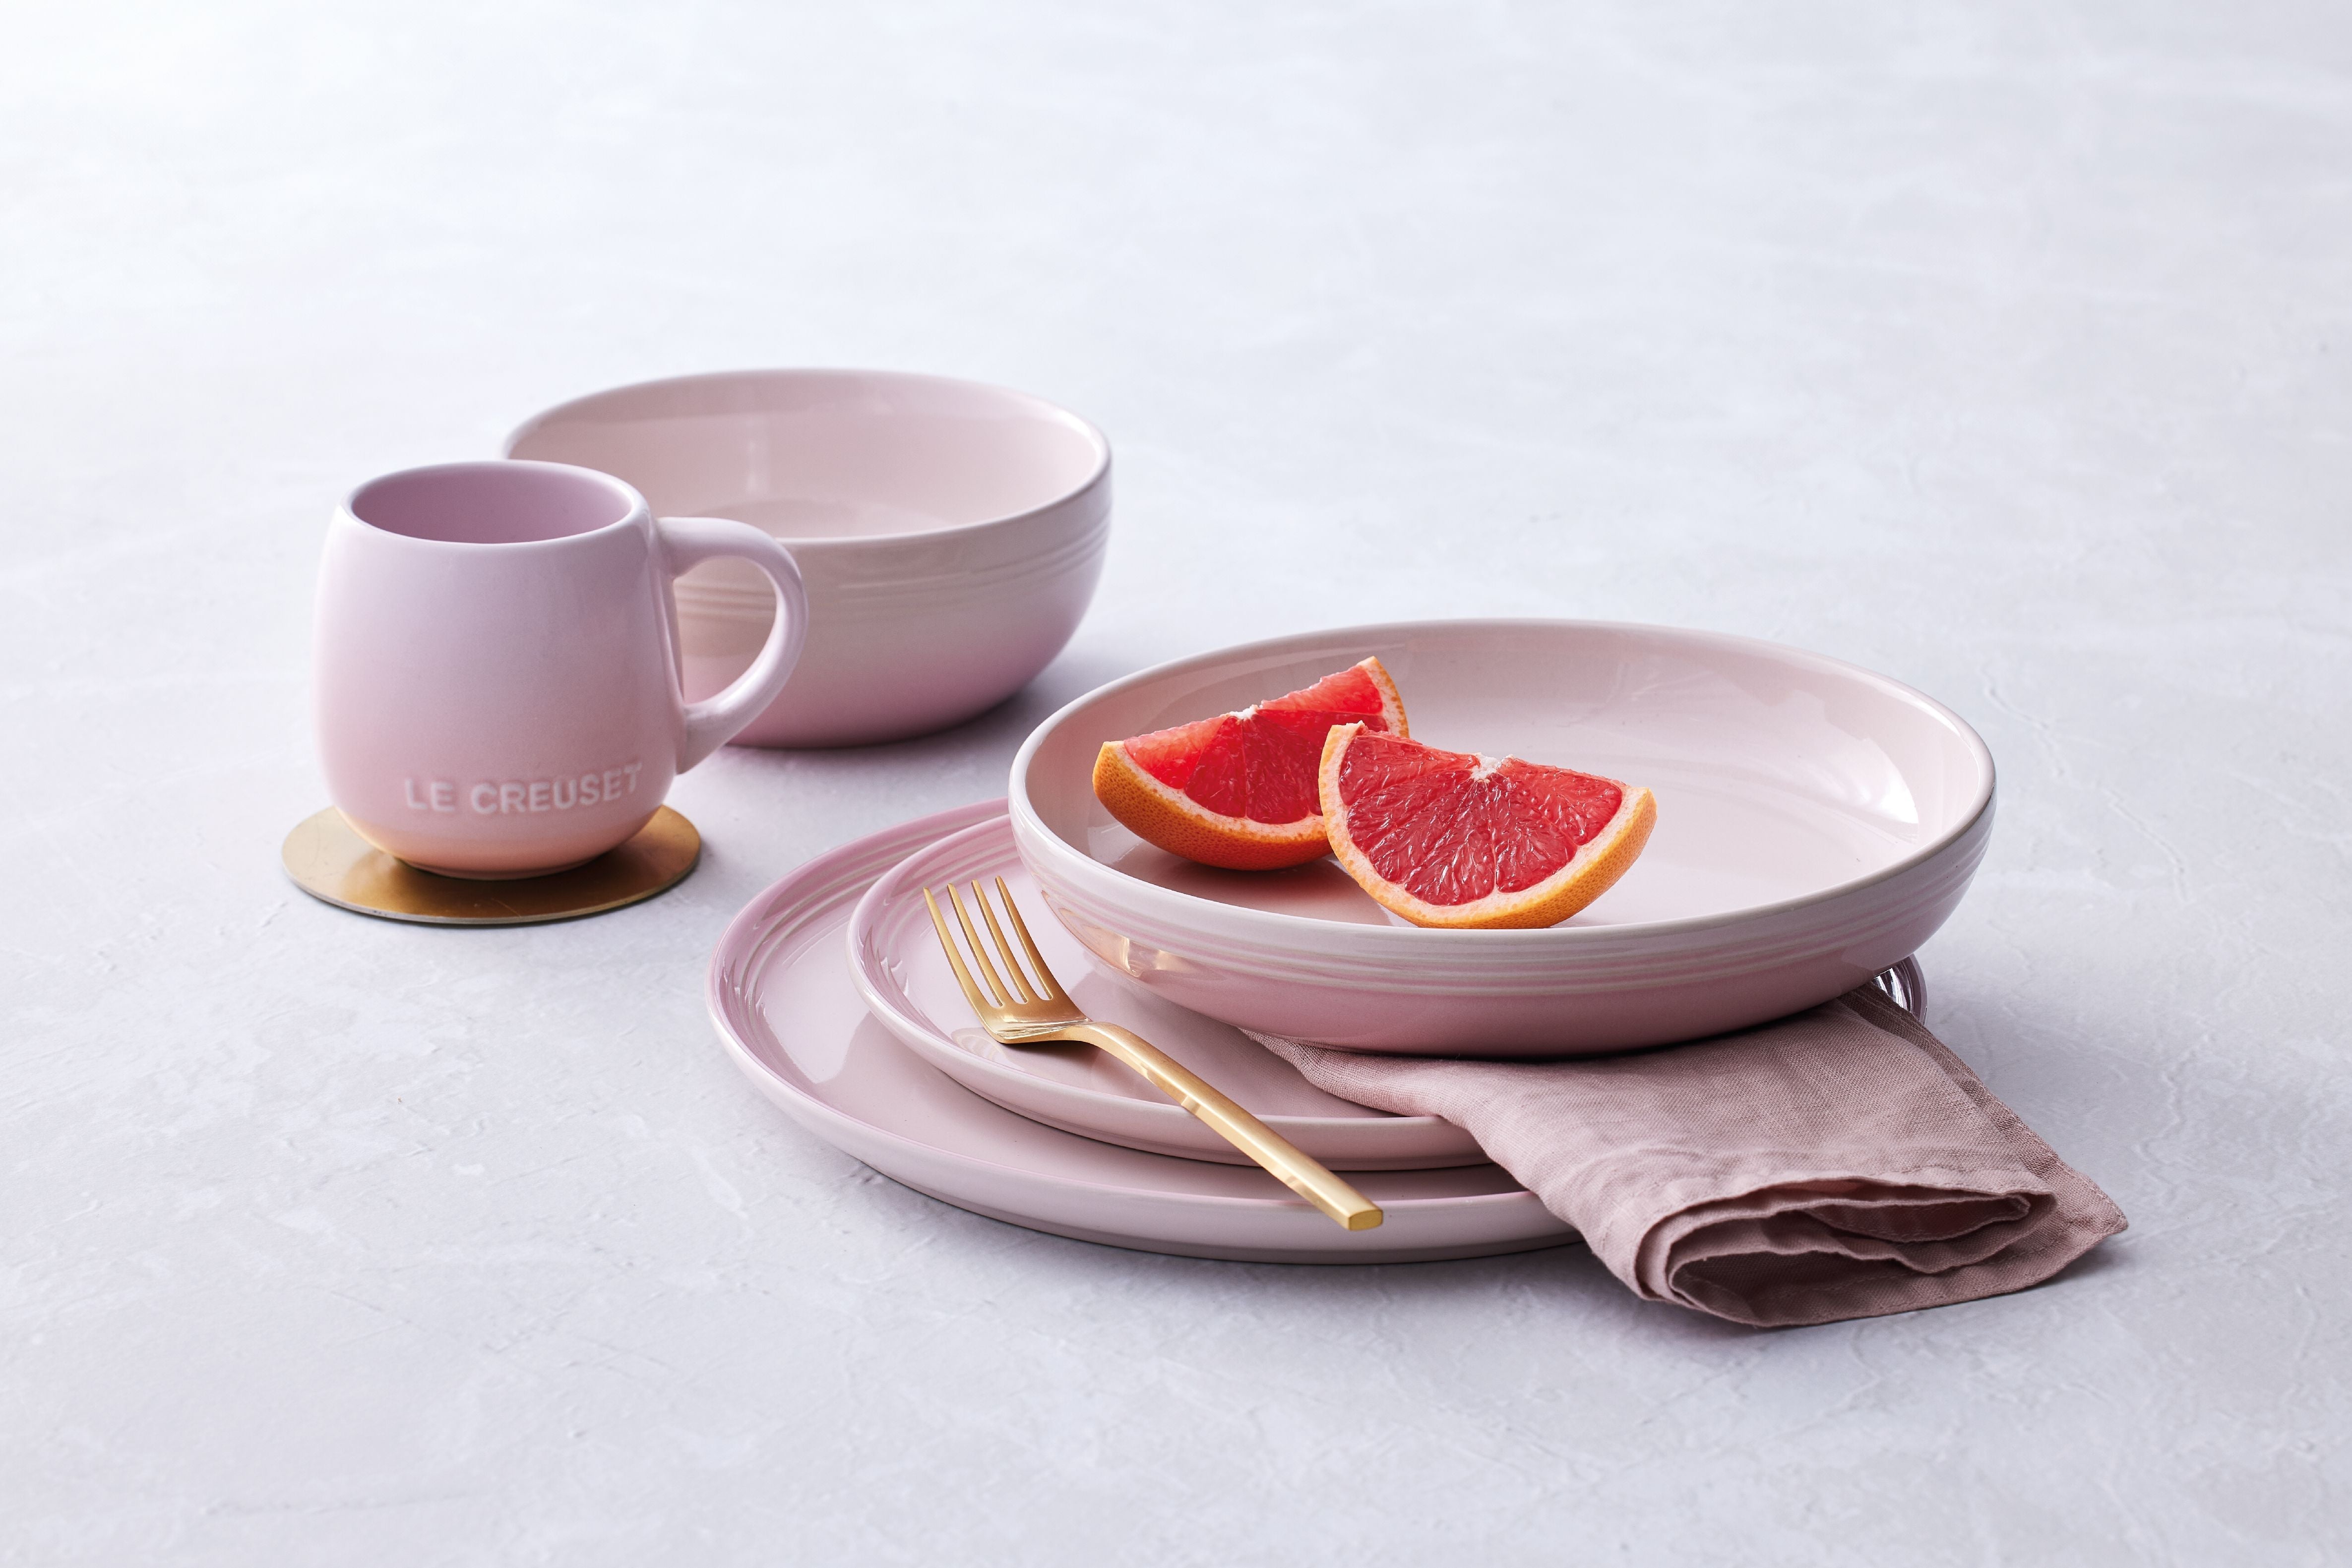 Le creuset coupe sideplade, shell pink